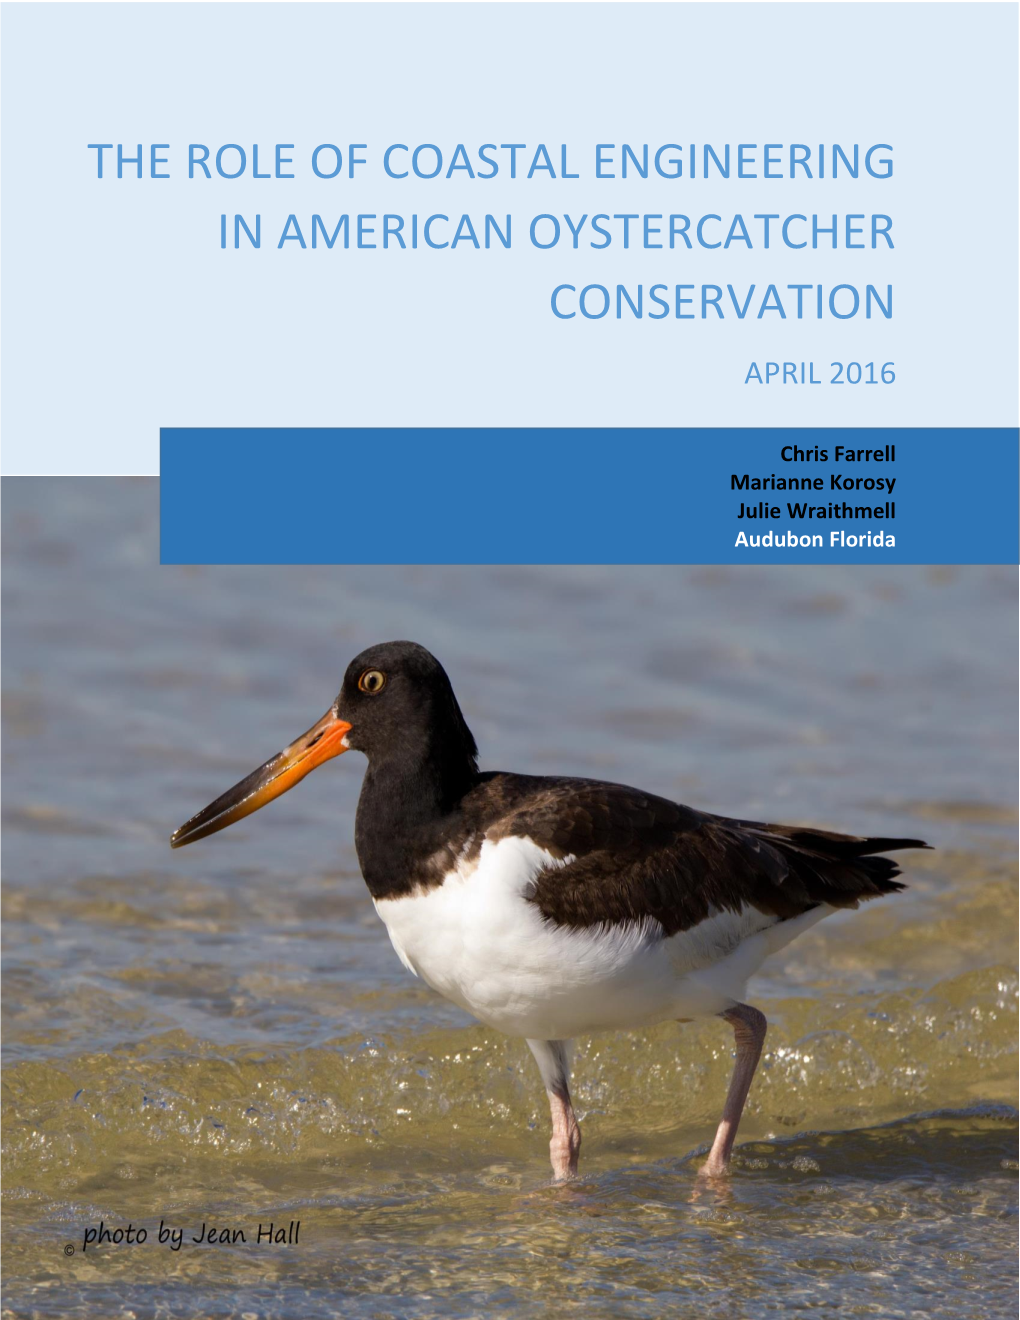 The Role of Coastal Engineering in American Oystercatcher Conservation April 2016